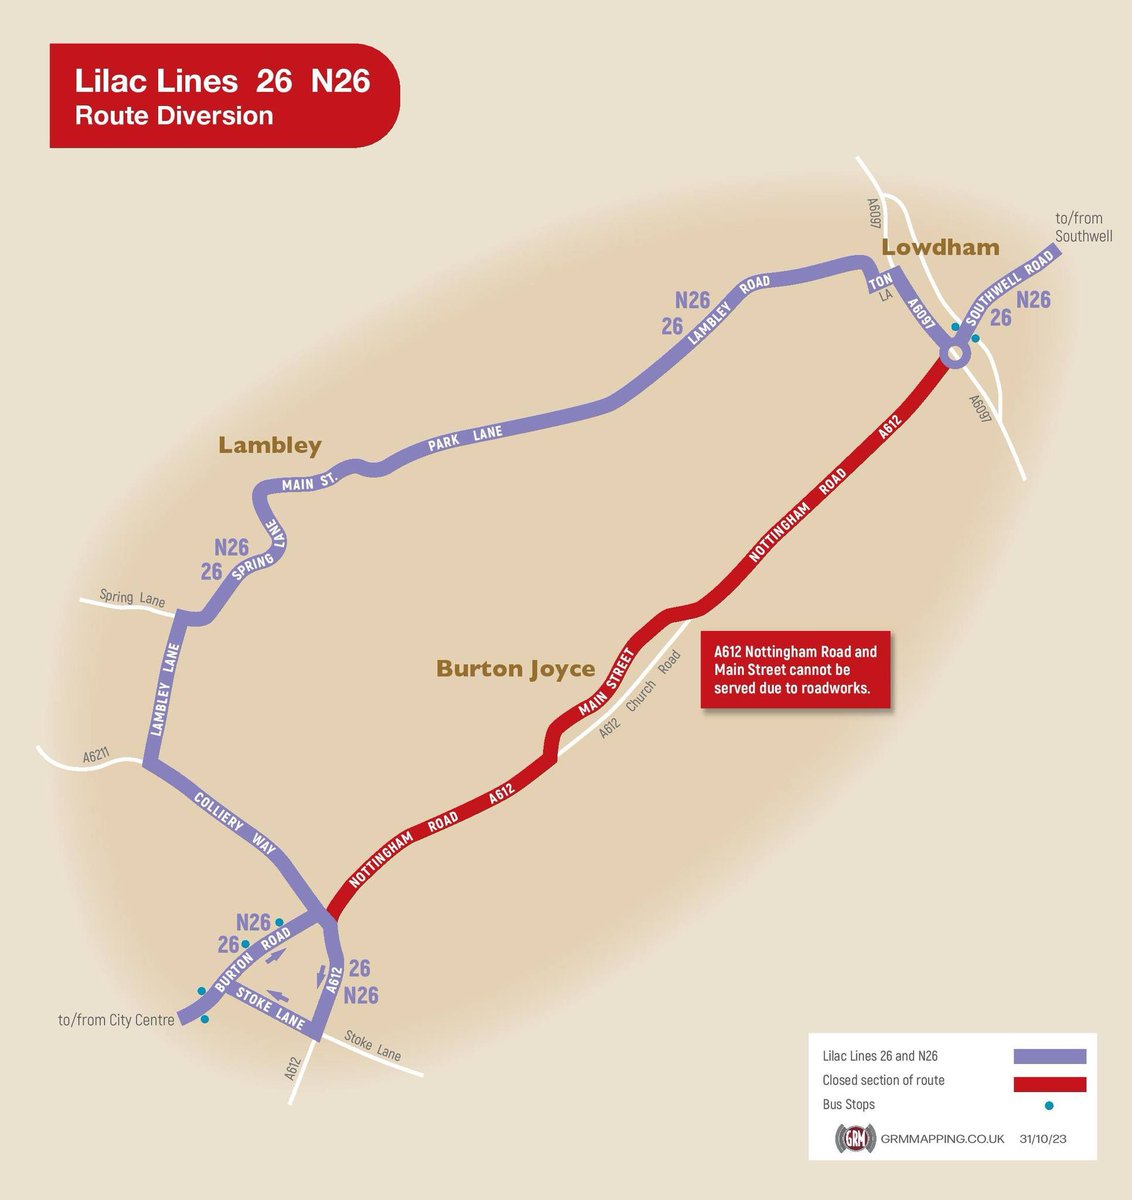 The A612 (Nottingham Road) between Burton Joyce and Lowdham is closed overnight between 20:00 – 05:45 from 7th May – 19th May inclusive for resurfacing works. Pathfinder 26 diverts through Lambley, with no evening service to Burton Joyce. Info: nctx.co.uk/service-updates